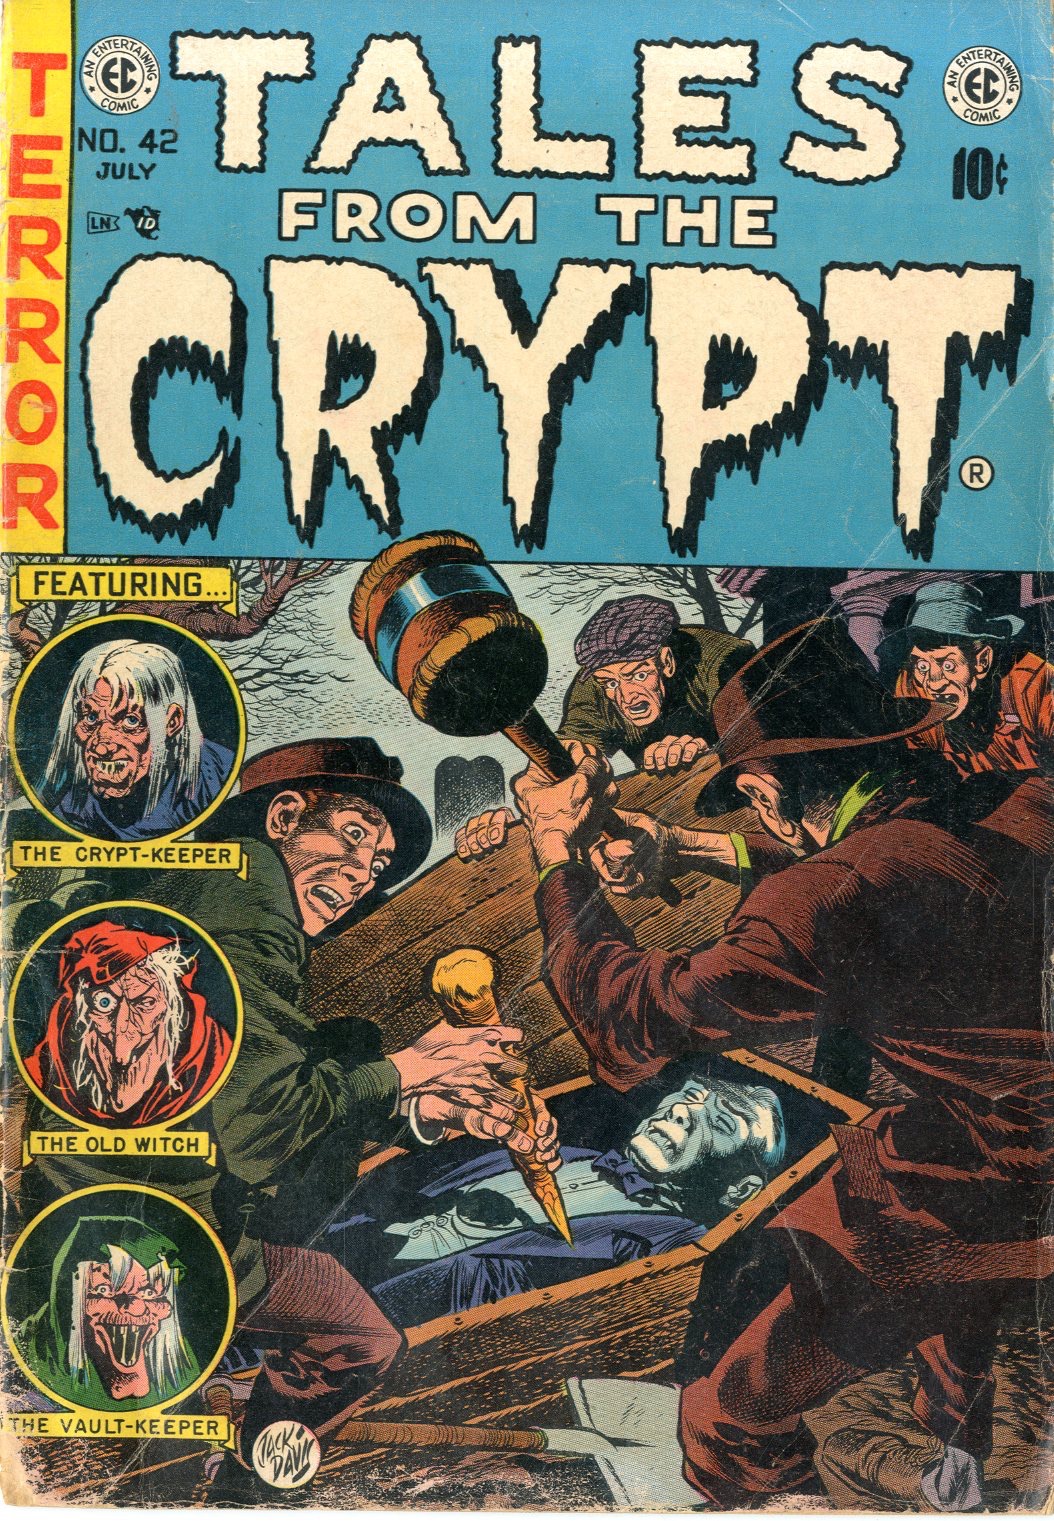 Tales from the Crypt Vol 1 42 | EC Comics Wiki | FANDOM powered by Wikia